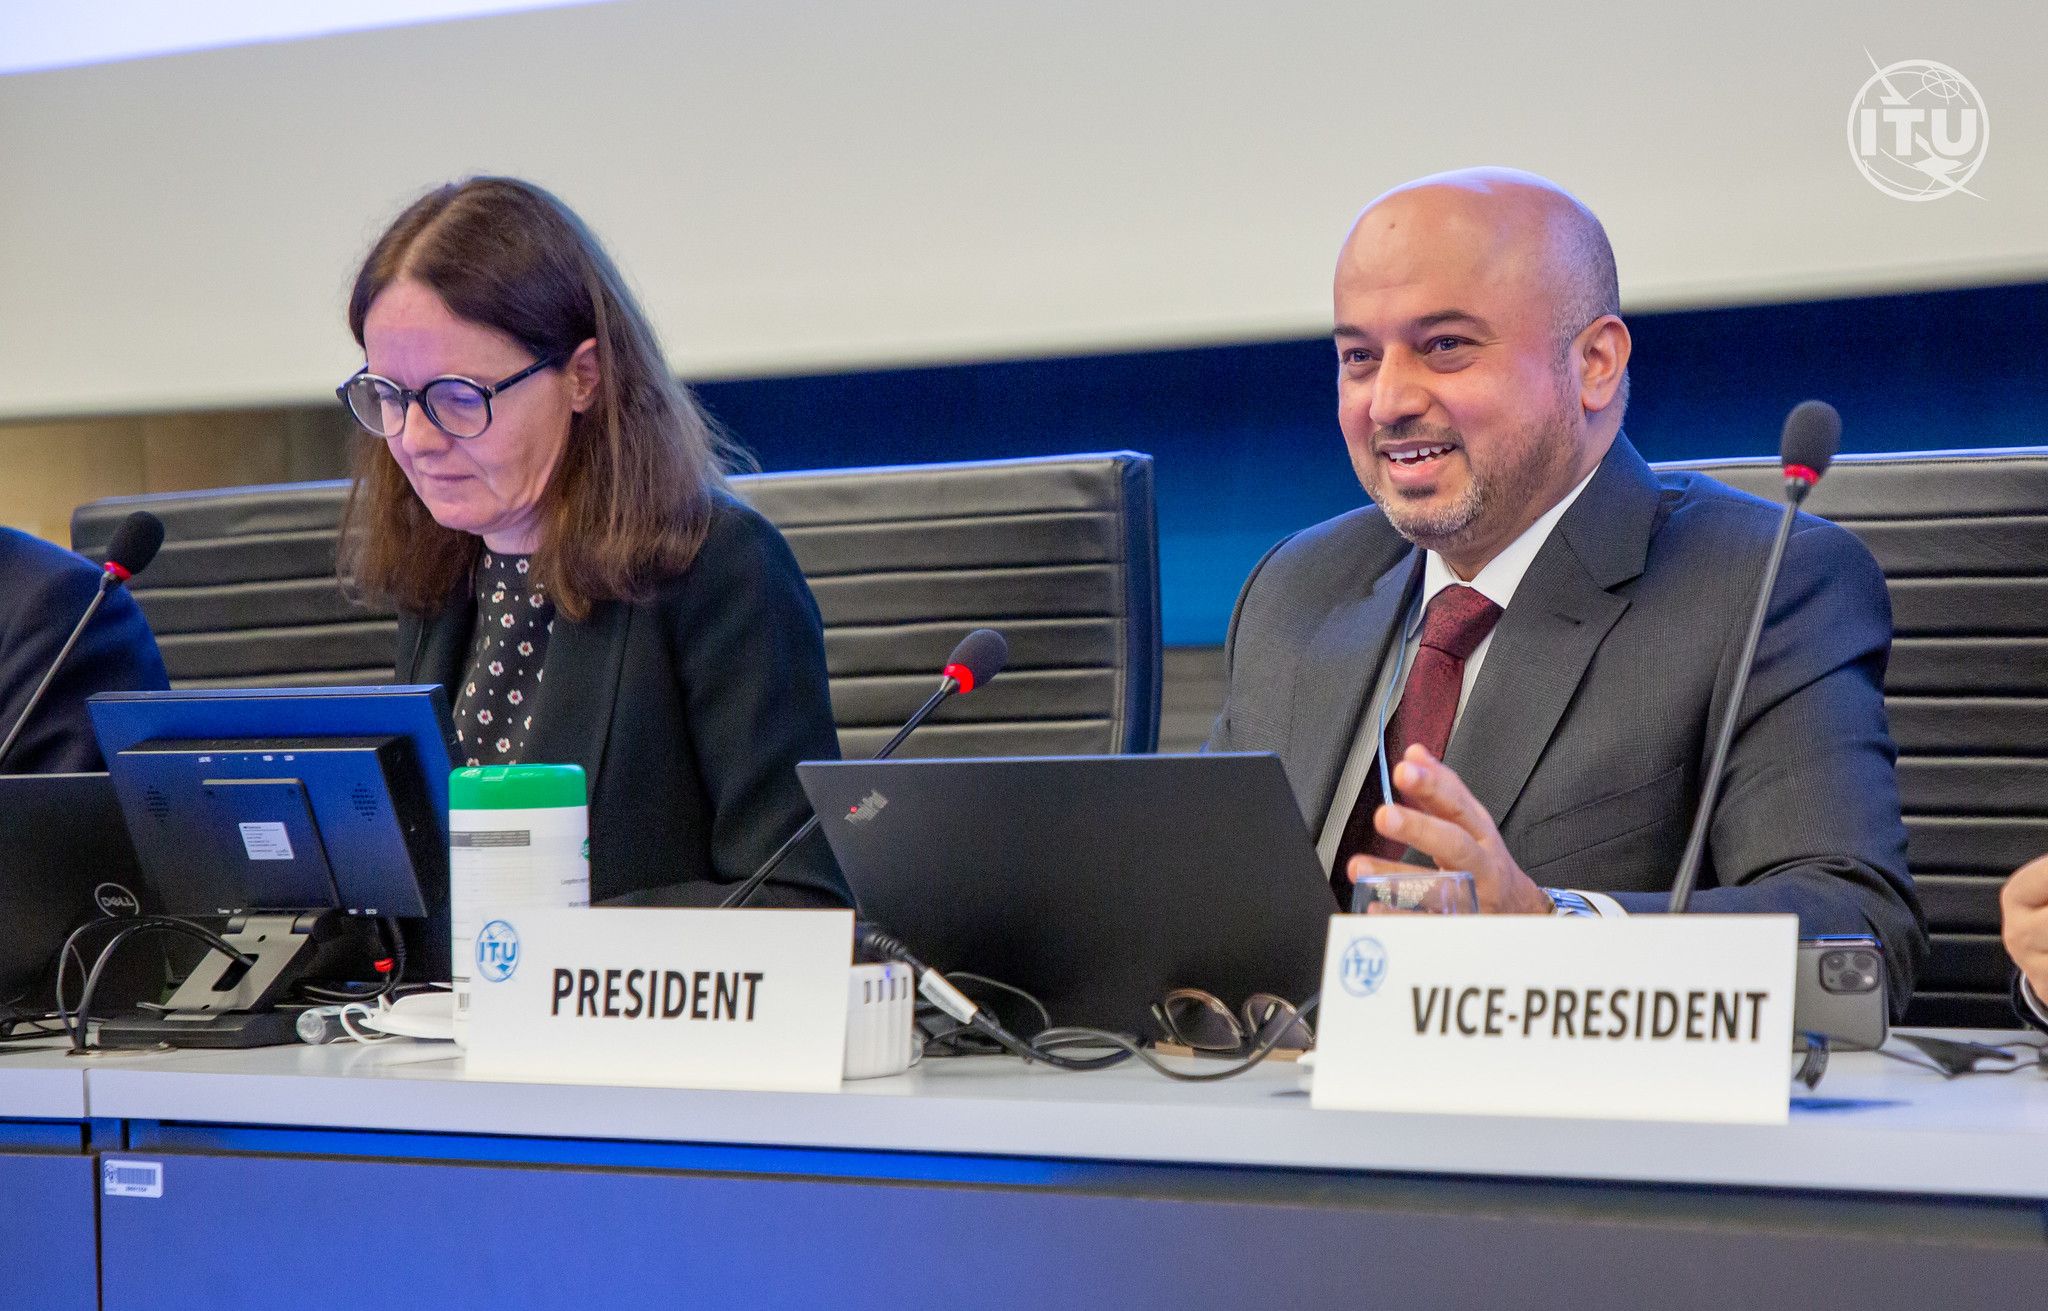 Collaboration, cooperation, and community: Q&A with ITU Council Chair featured image